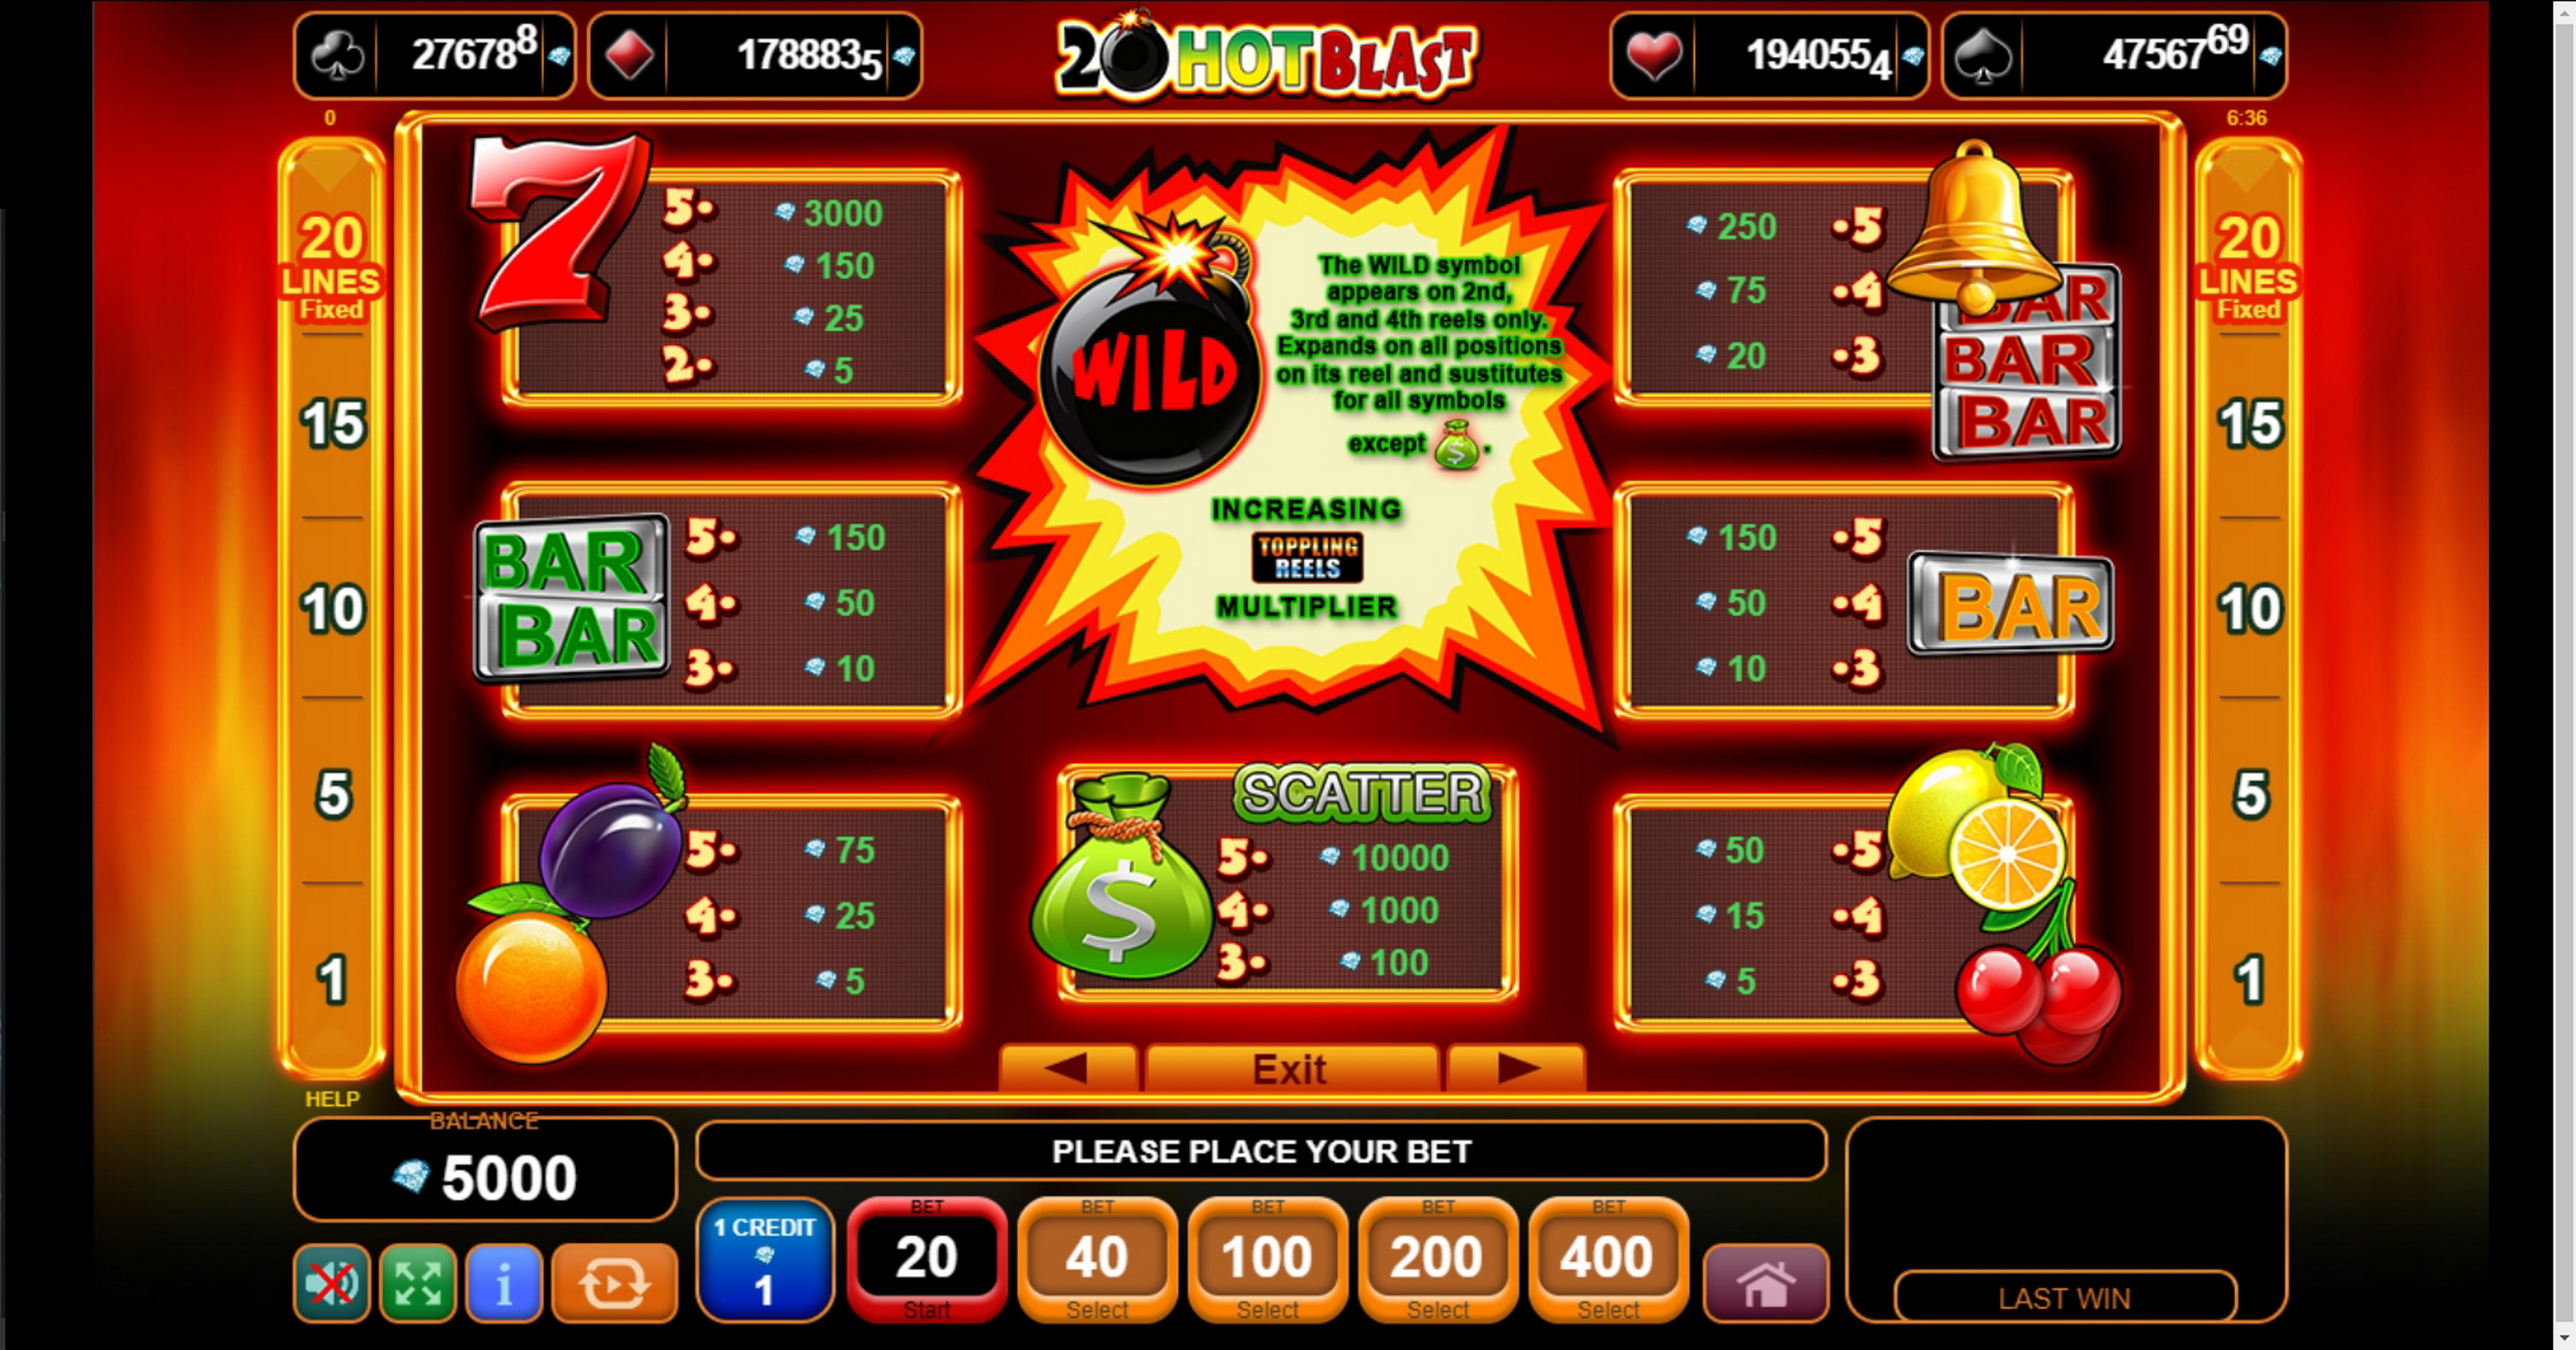 Info of 20 Hot Blast Slot Game by EGT